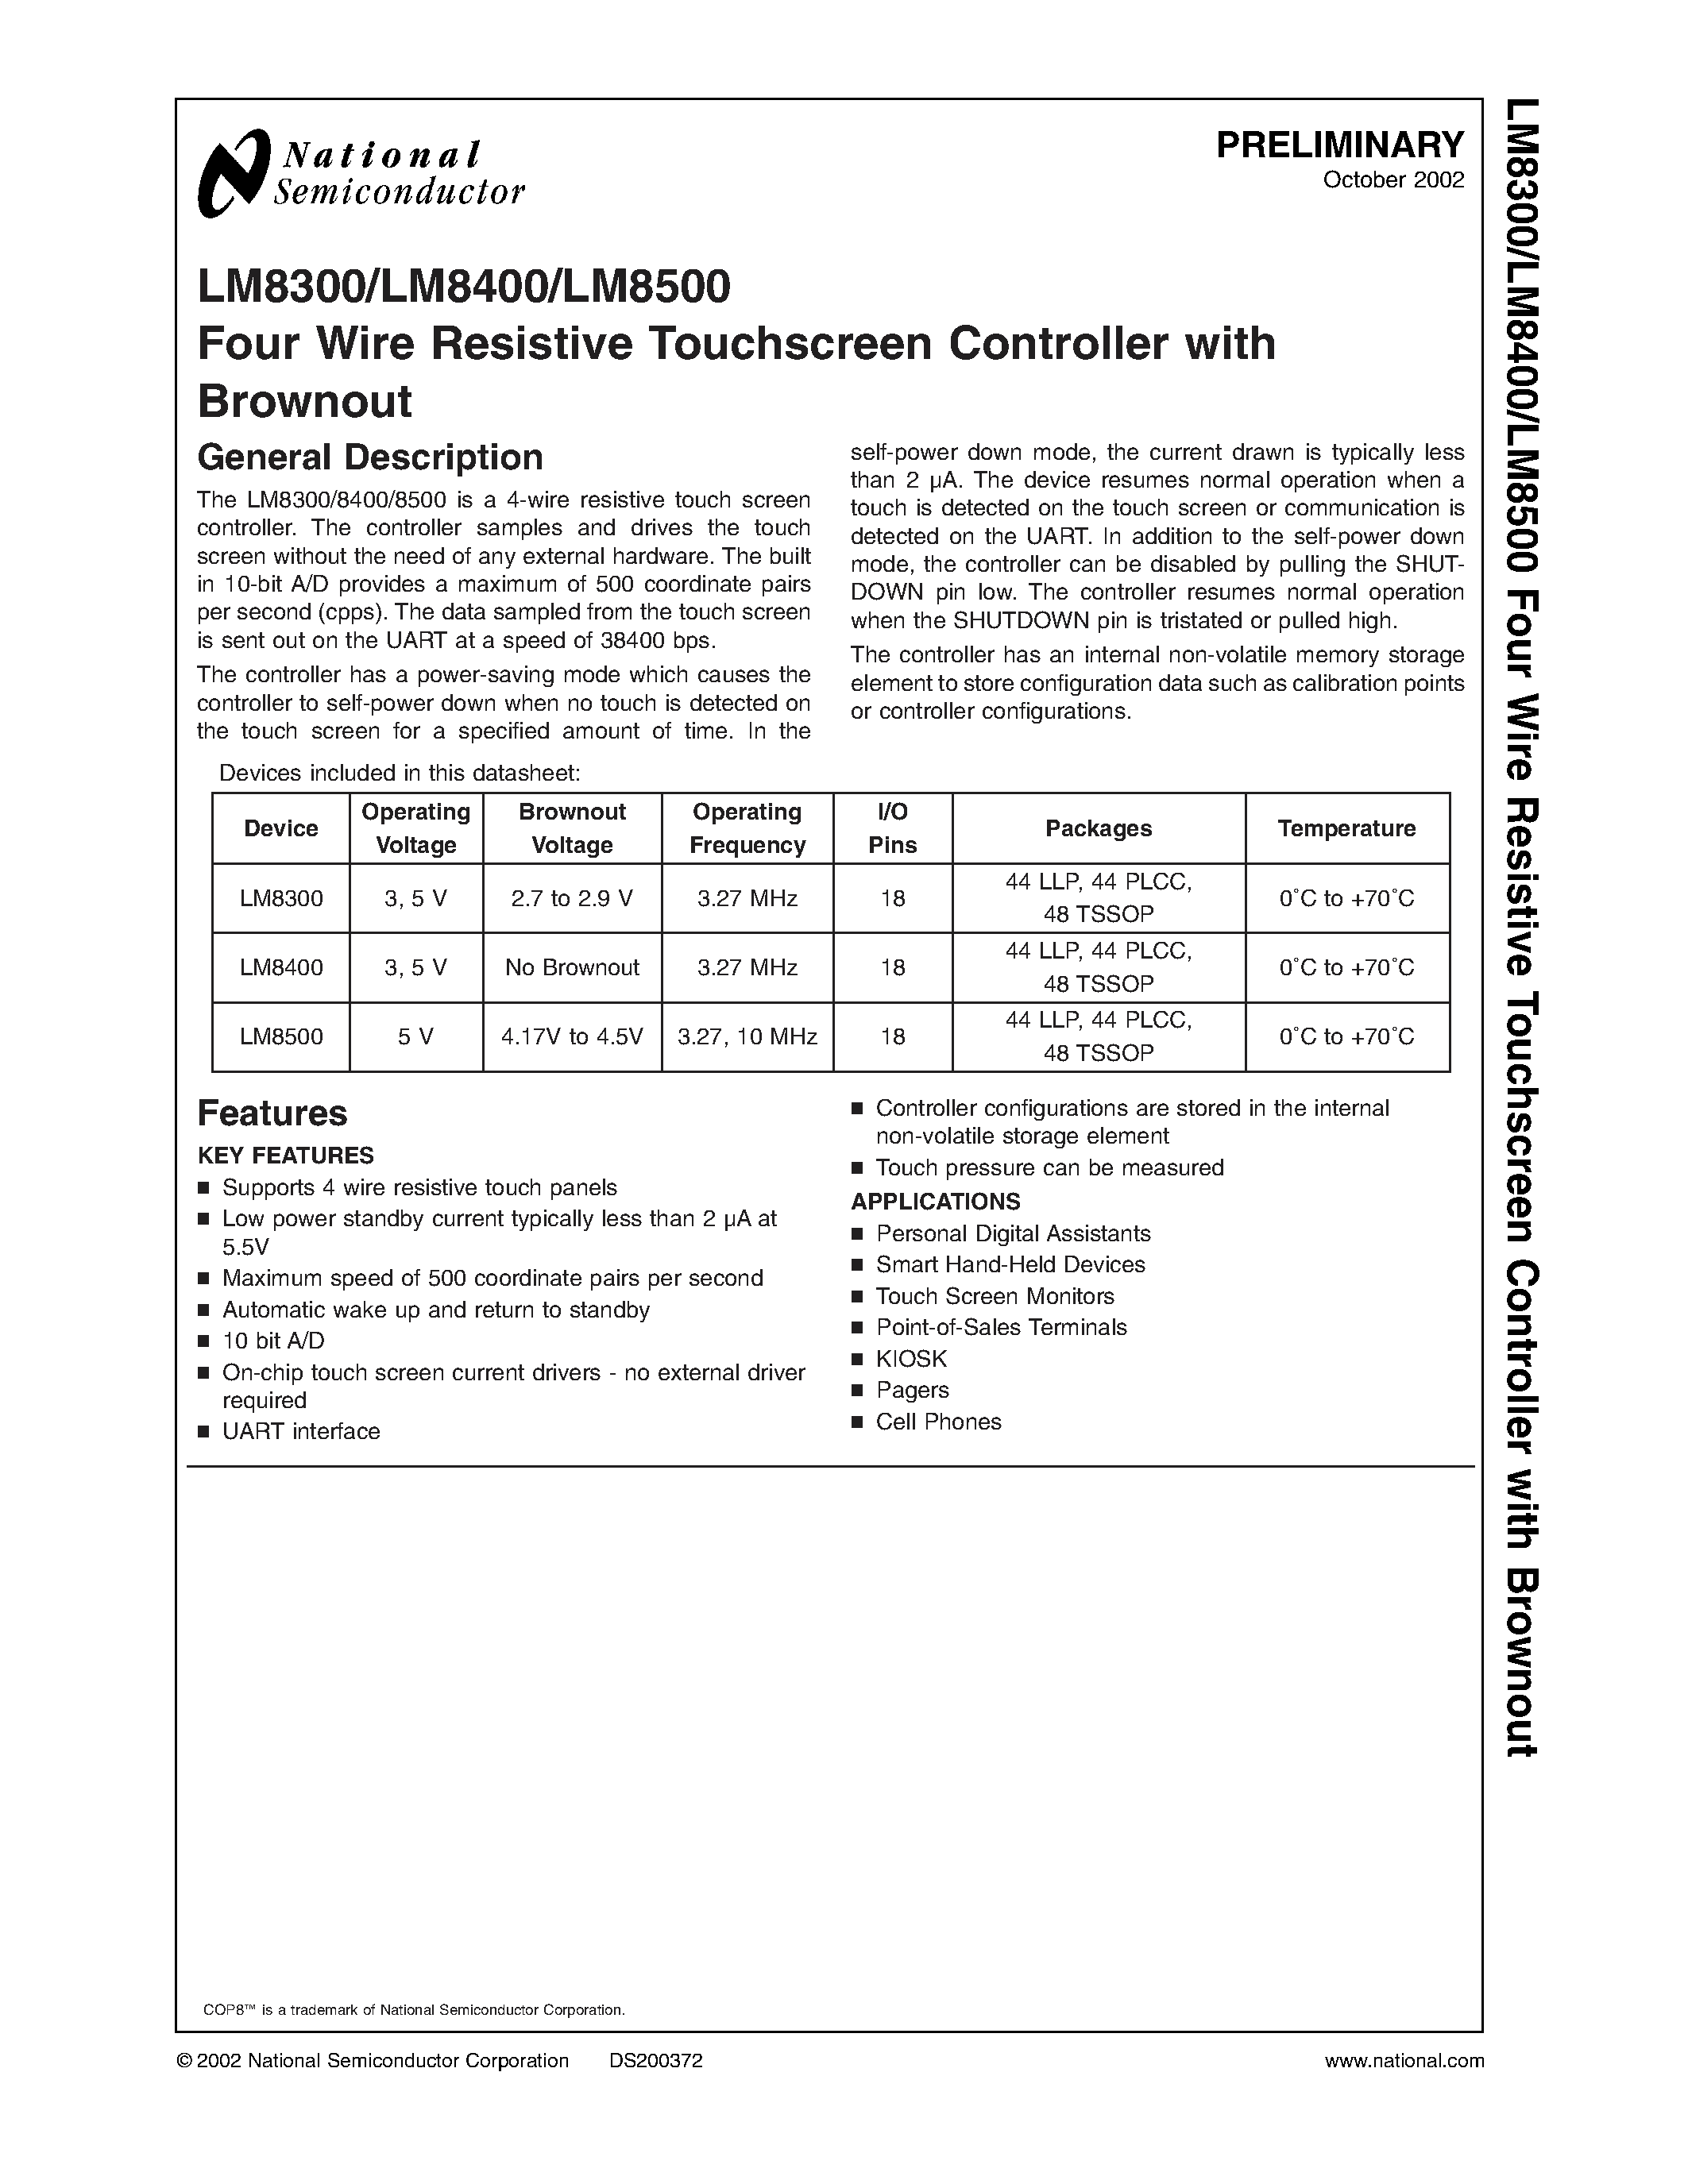 Datasheet LM8500 - Four Wire Resistive Touchscreen Controller with Brownout page 1